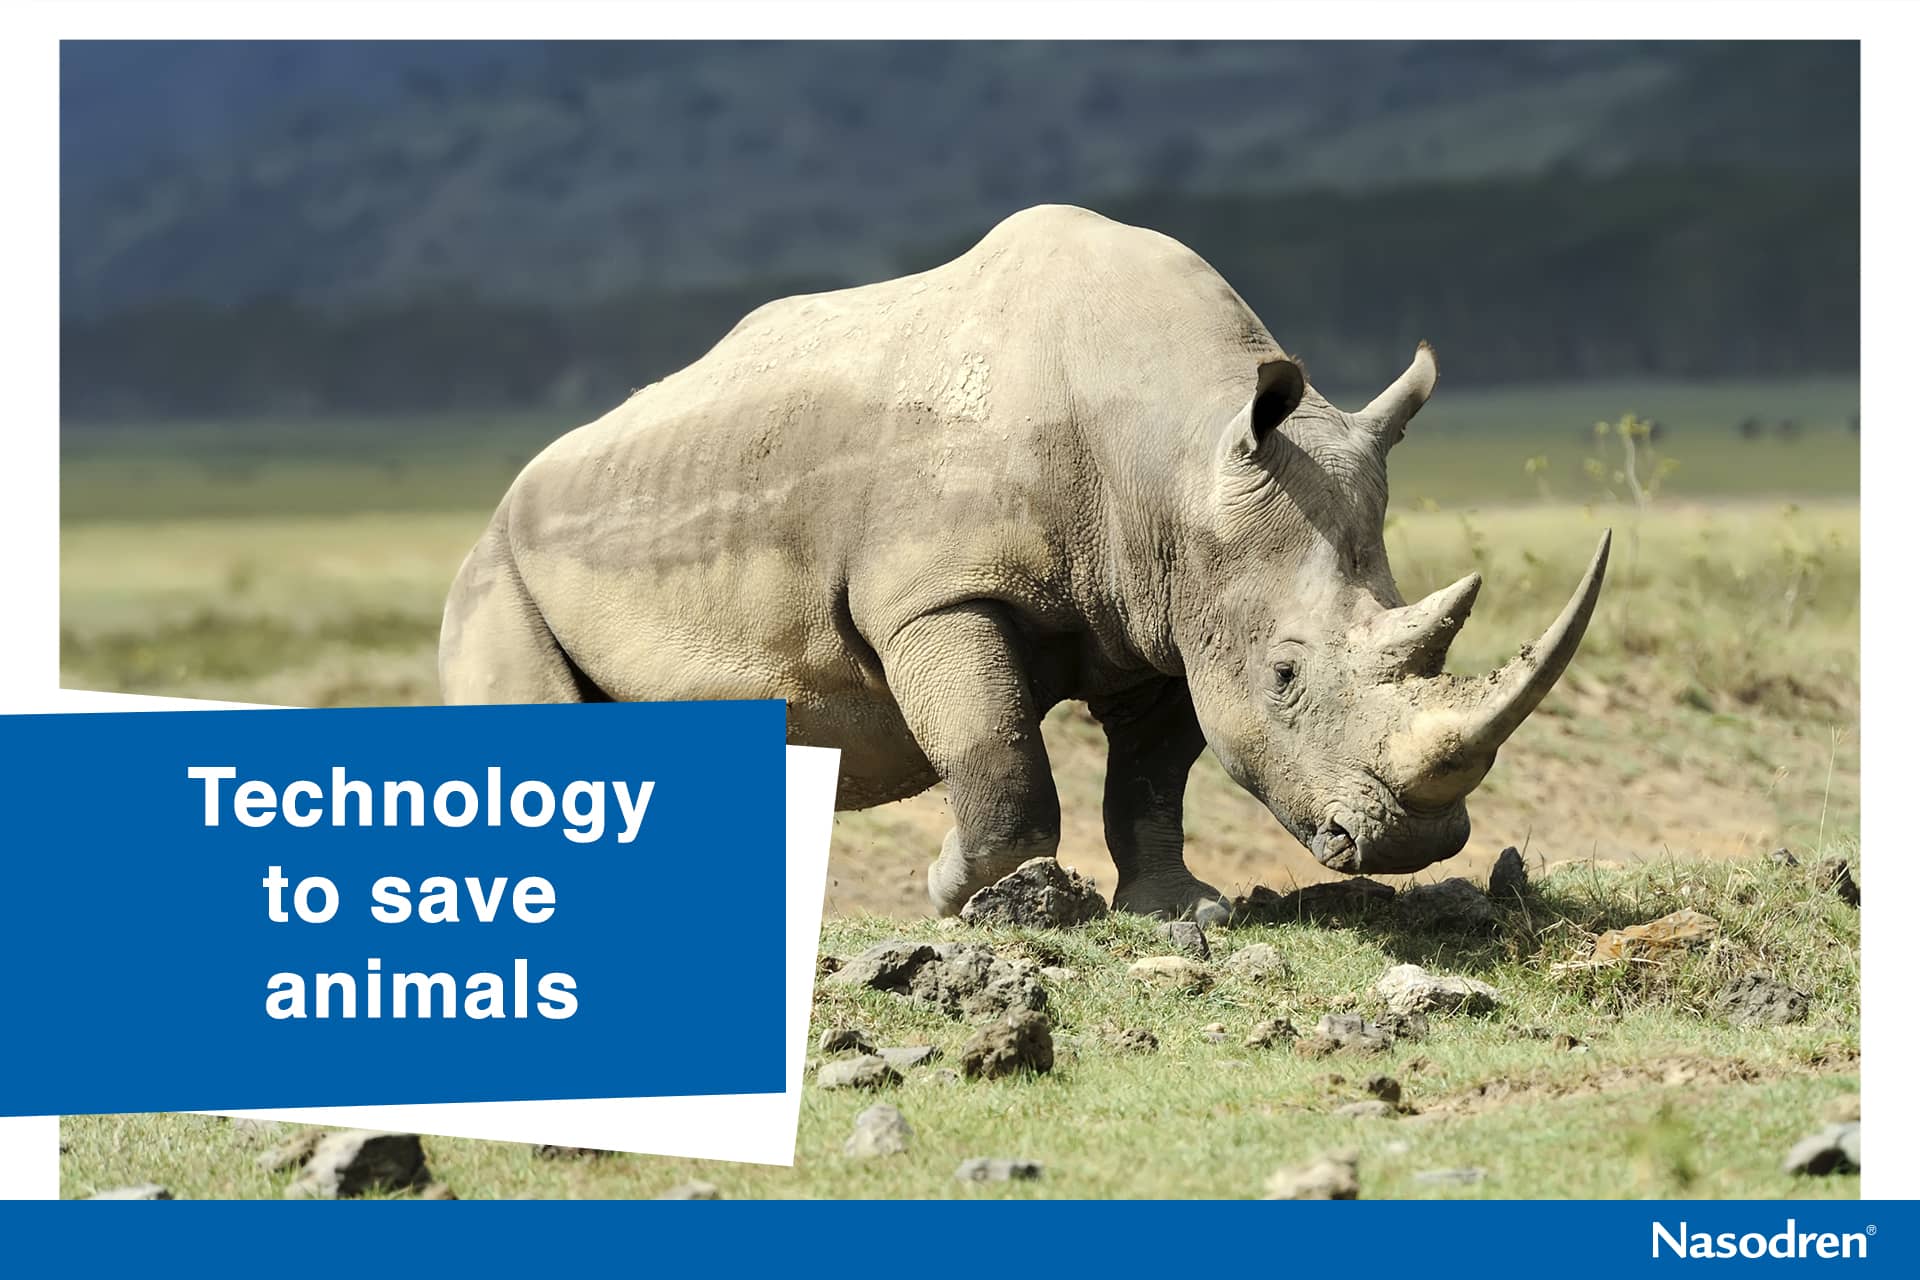 Technology to save animals